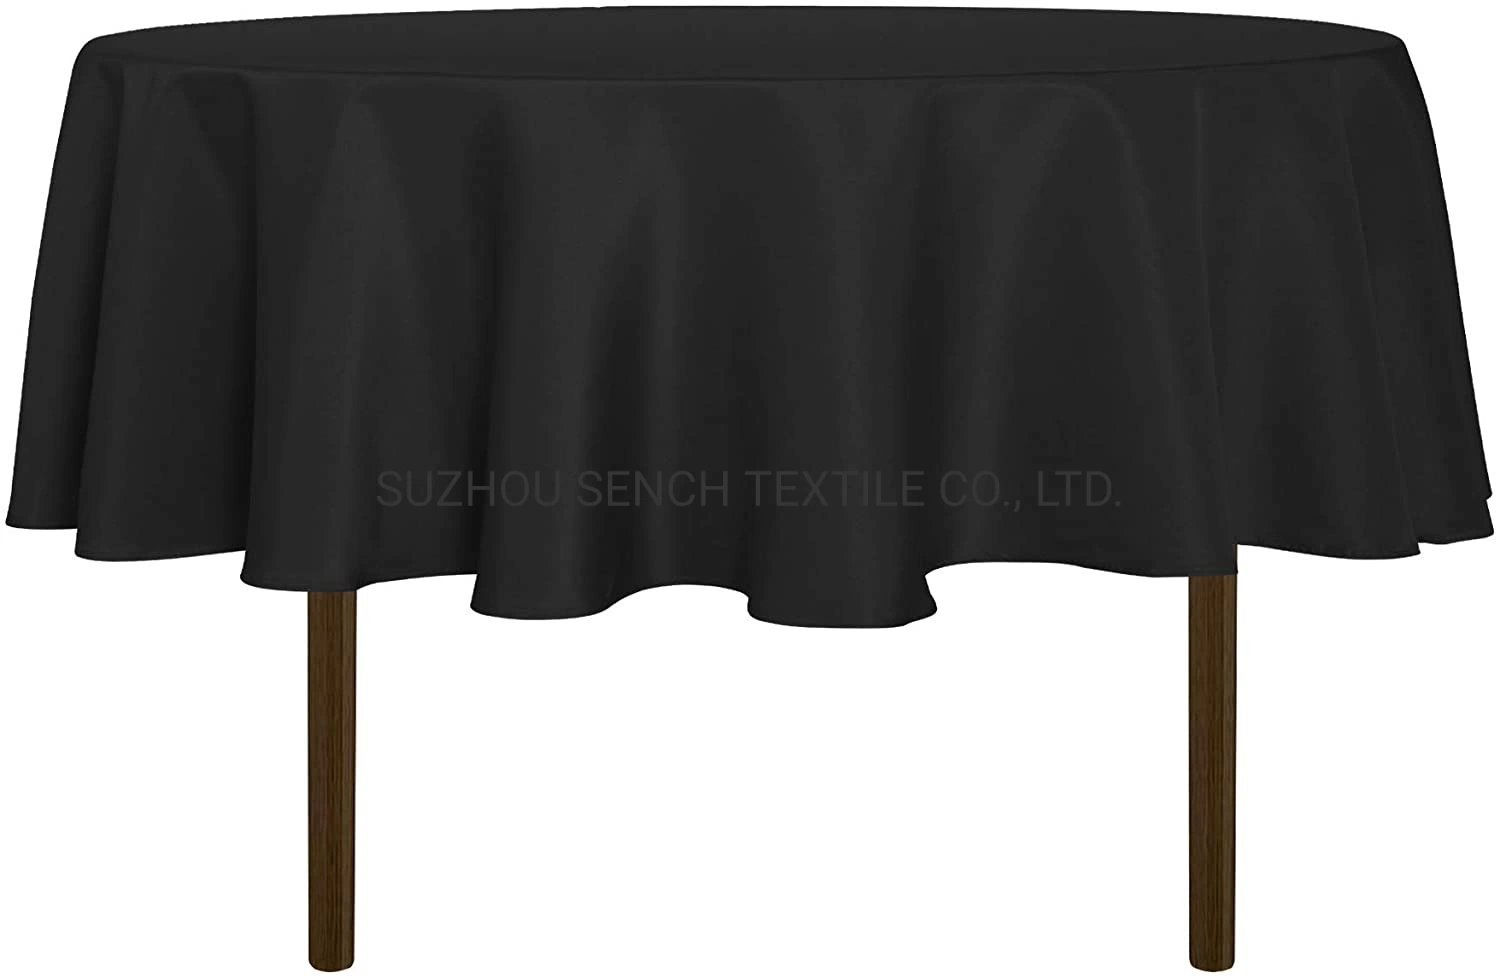 Round Tablecloth, Water Resistant Spill Proof Washable Polyester Table Cloth Decorative Fabric Table Cover for Dining Table, Buffet Parties and Camping